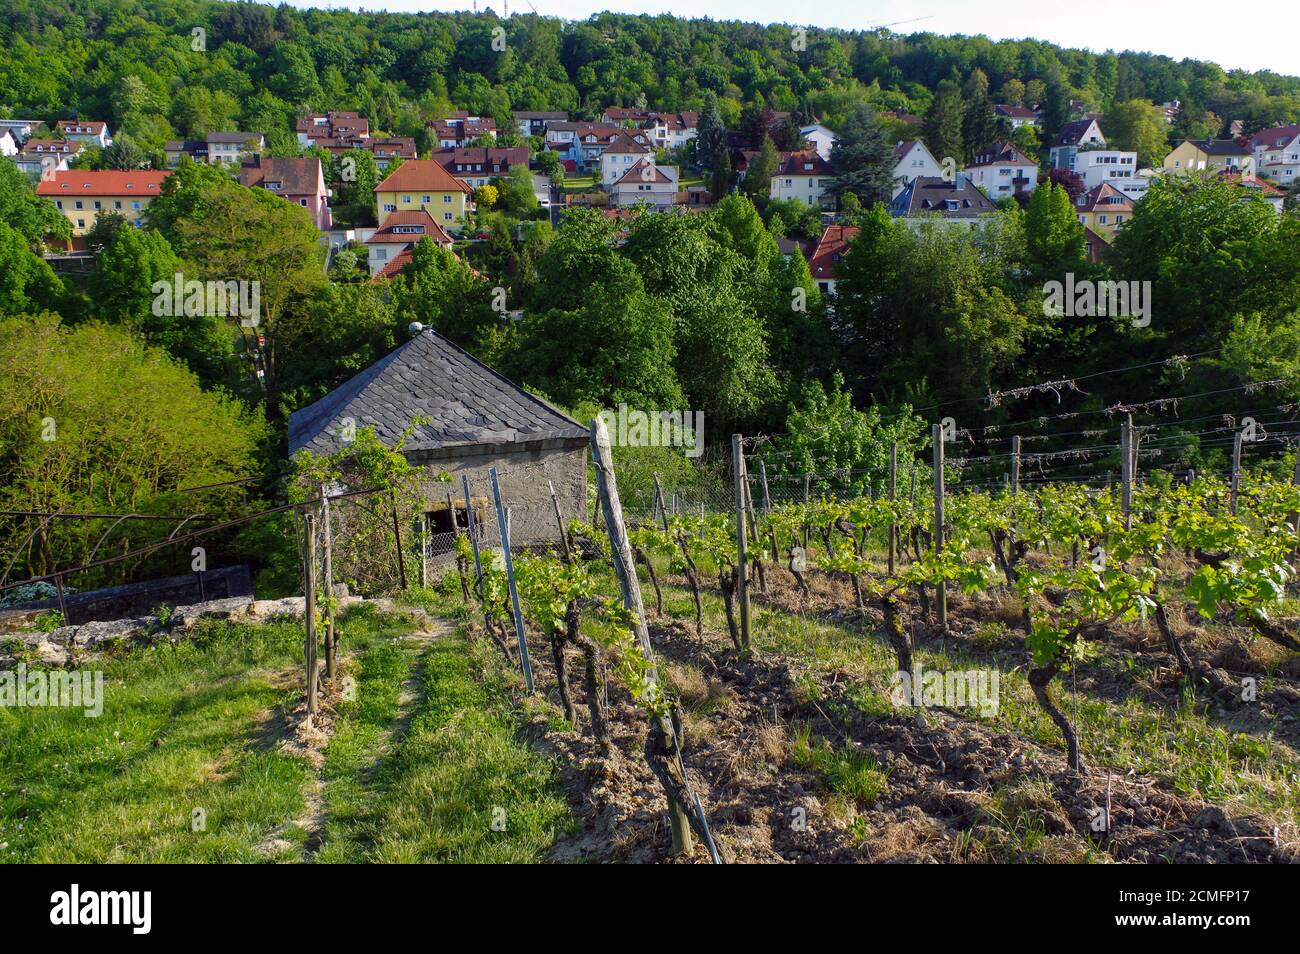 Beautiful old Wine house surrounded with vineyard hills. Grape fields near Wuerzburg, Germany Stock Photo